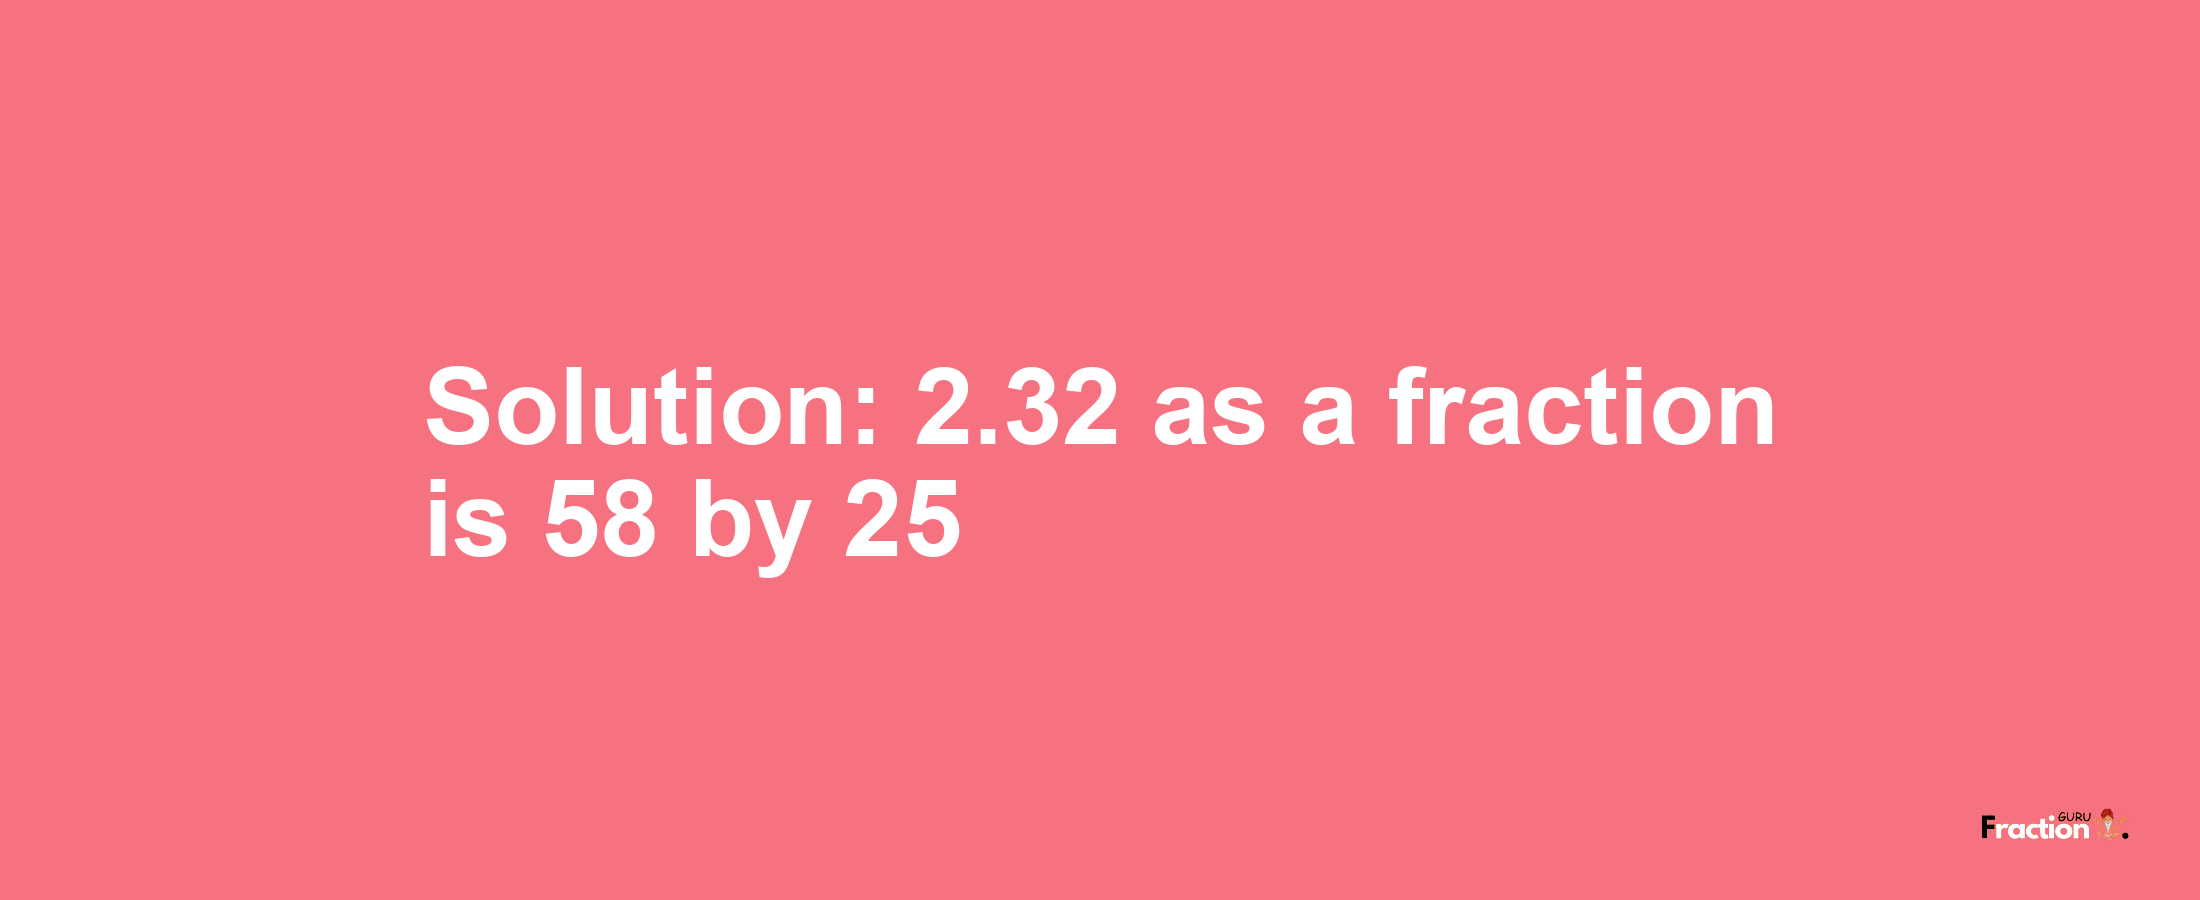 Solution:2.32 as a fraction is 58/25